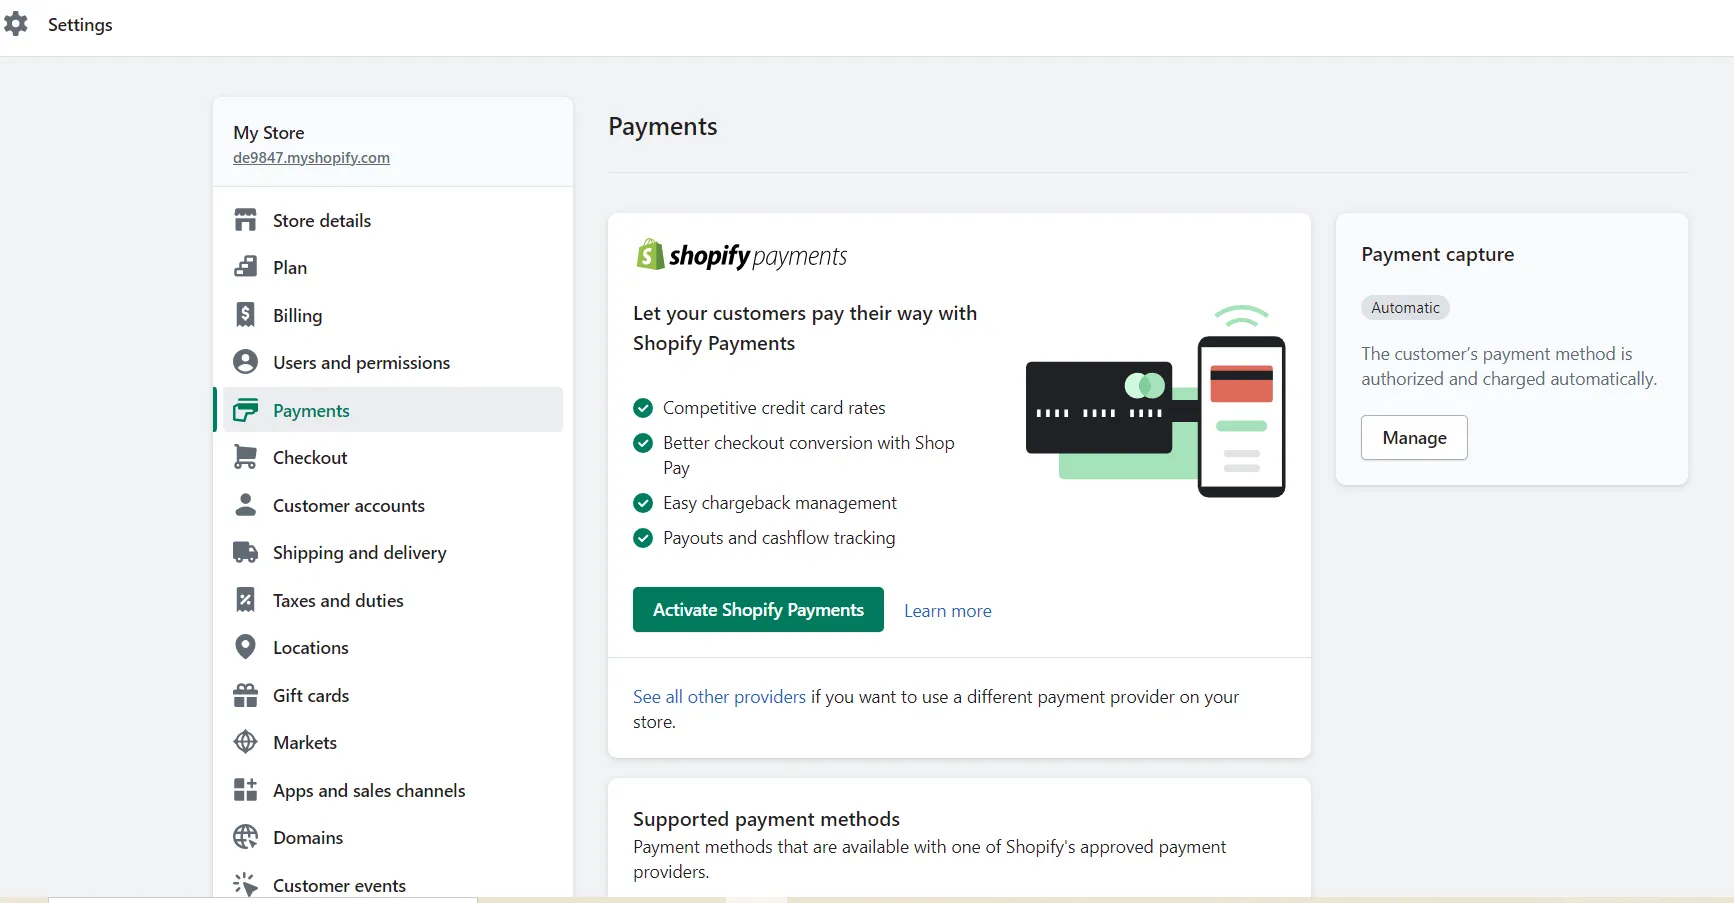 Activate Shopify payments